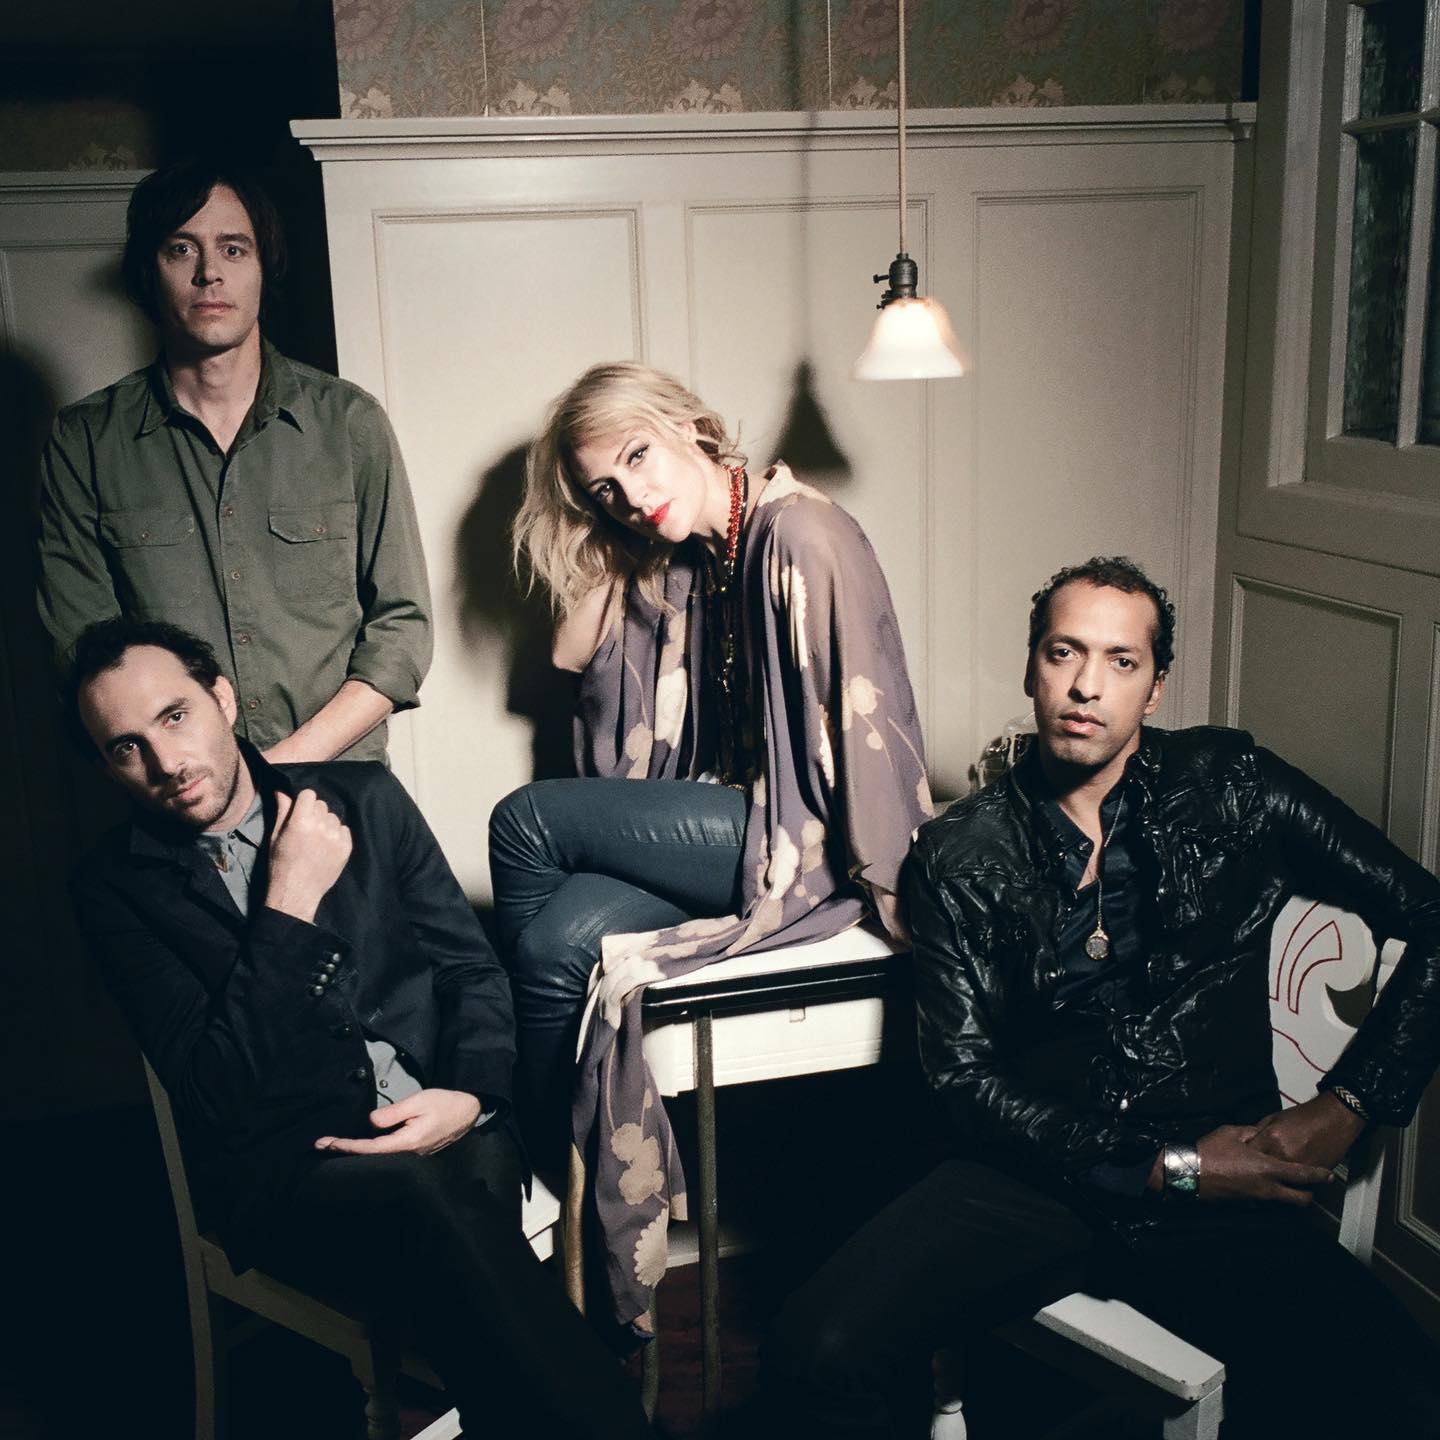 On 'All Comes Crashing,' Metric return with a bounce and a shove.